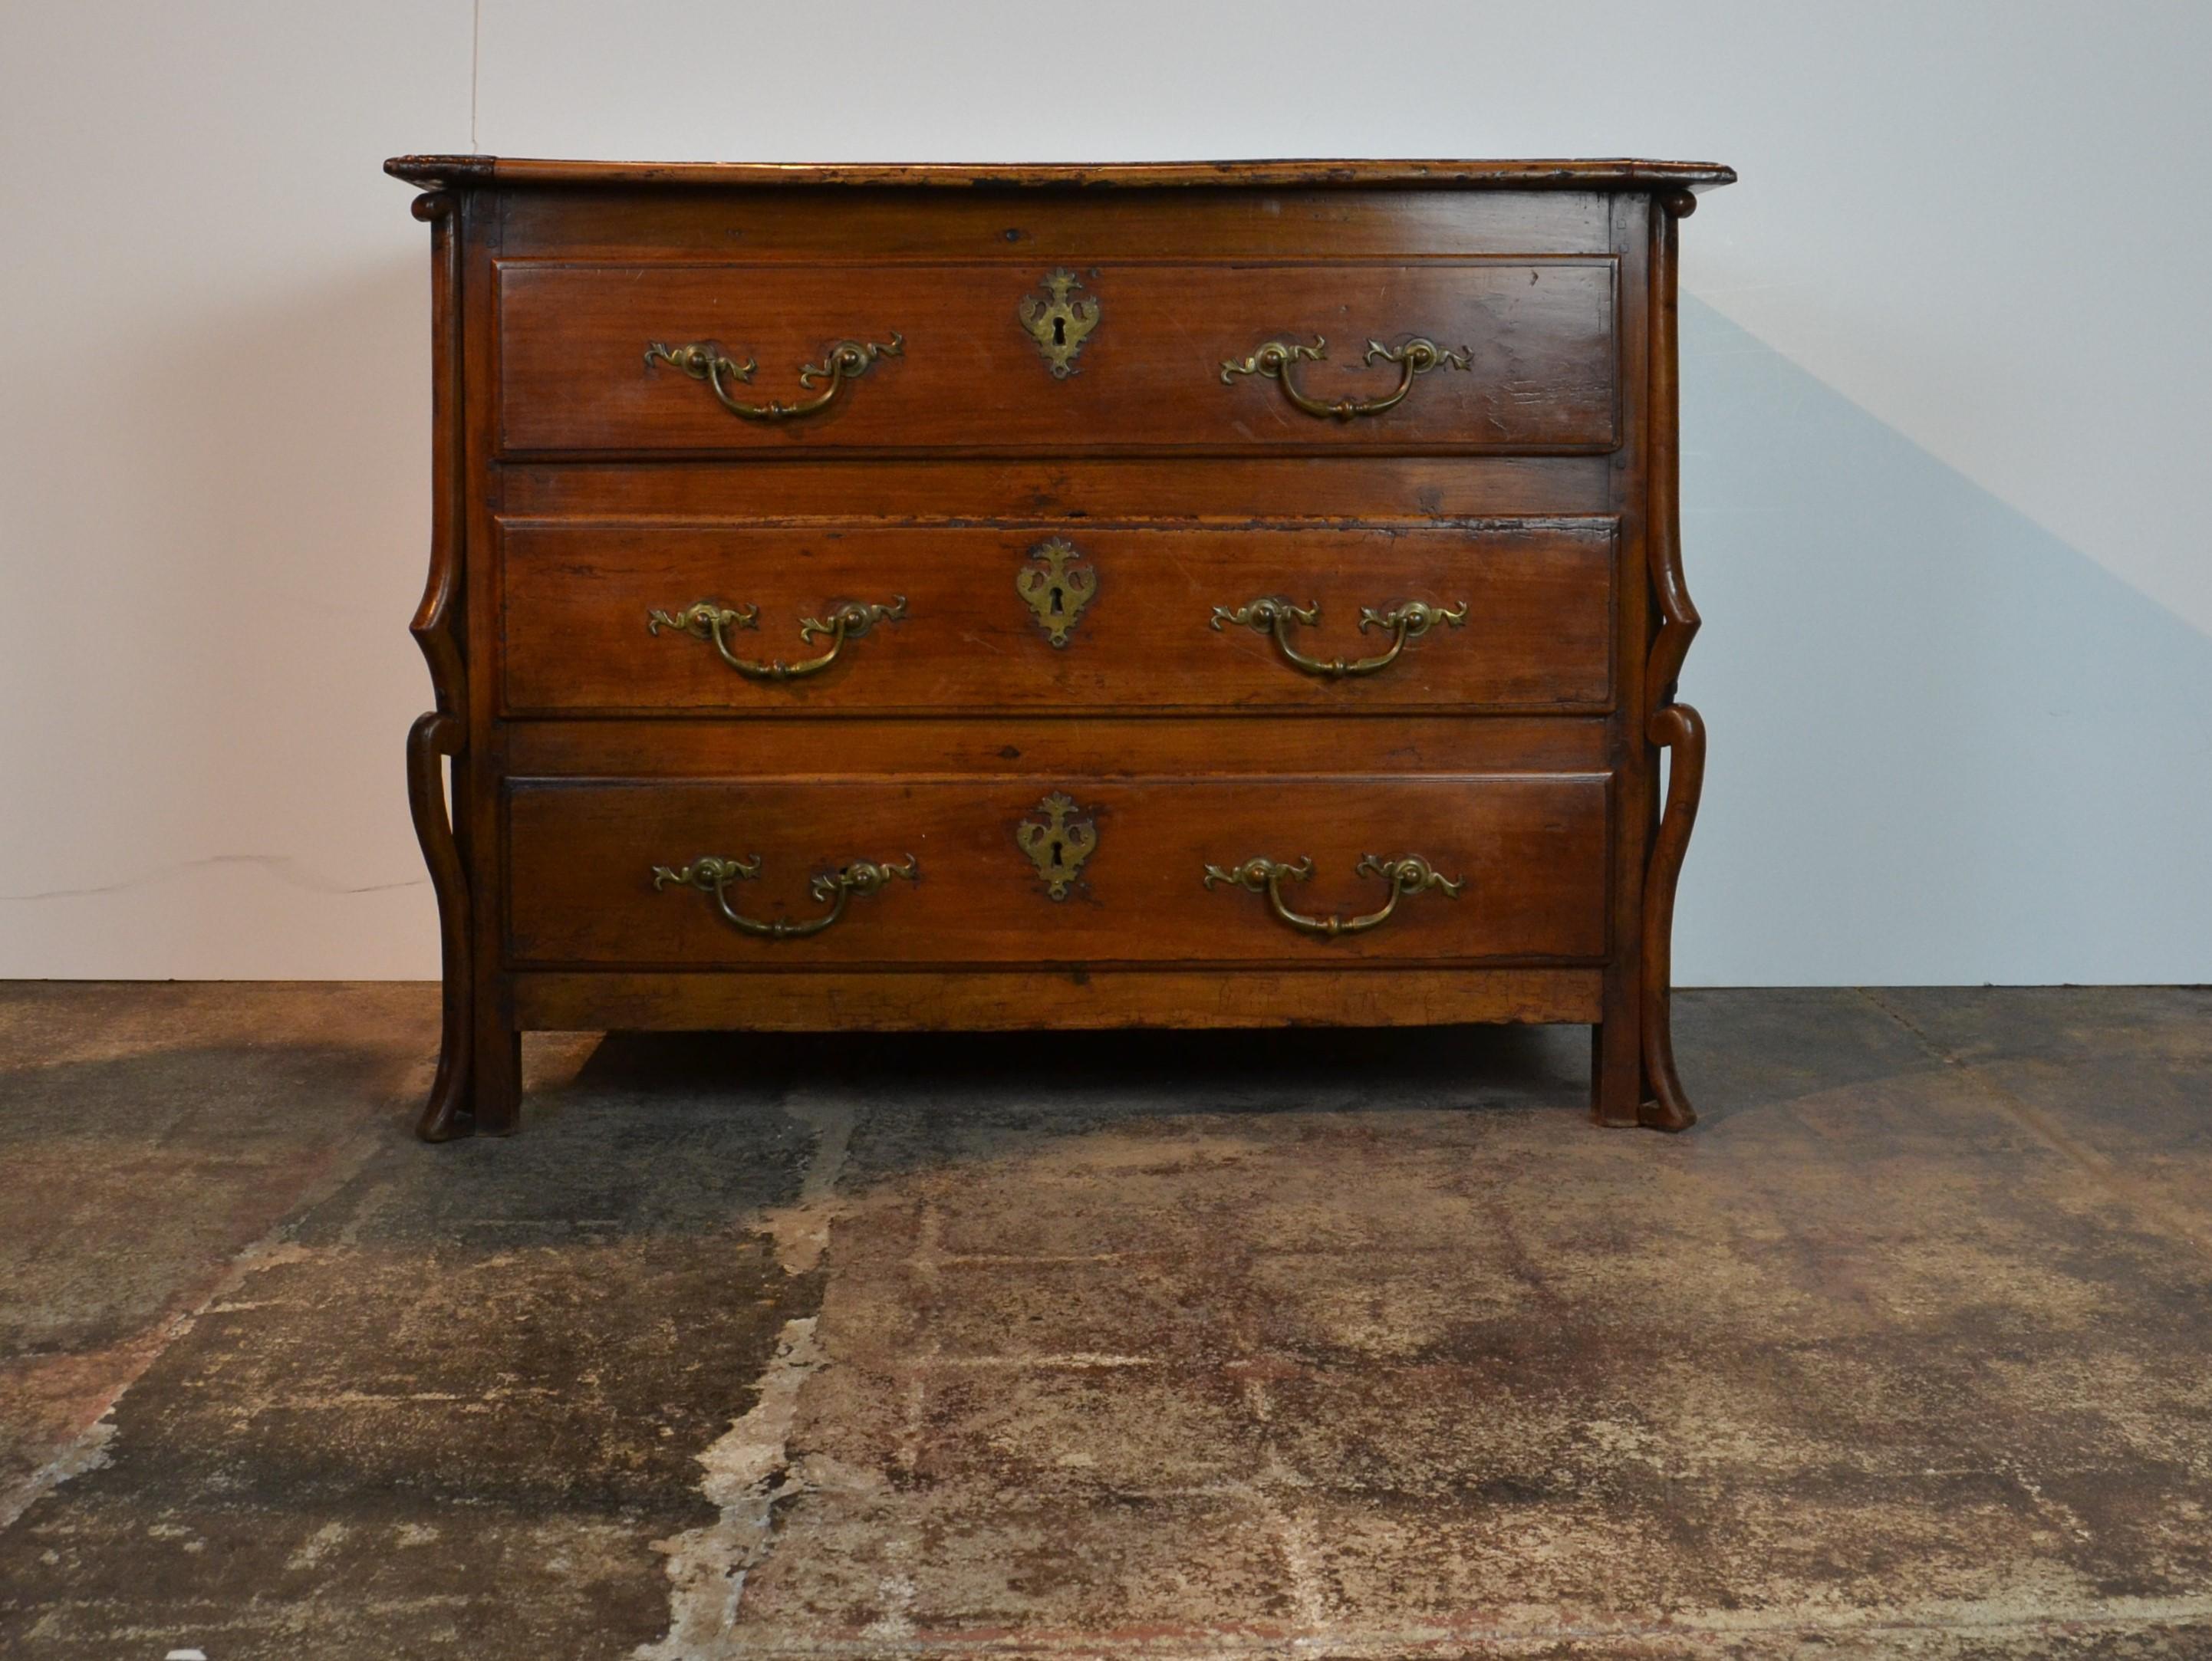 A very rare Italian chest of 3 drawers in fruitwood. Unusual front leg and foot embellishments, circa 1750. Heavy brass drop handles. Early brass keyhole escutcheons. Overall, a really 